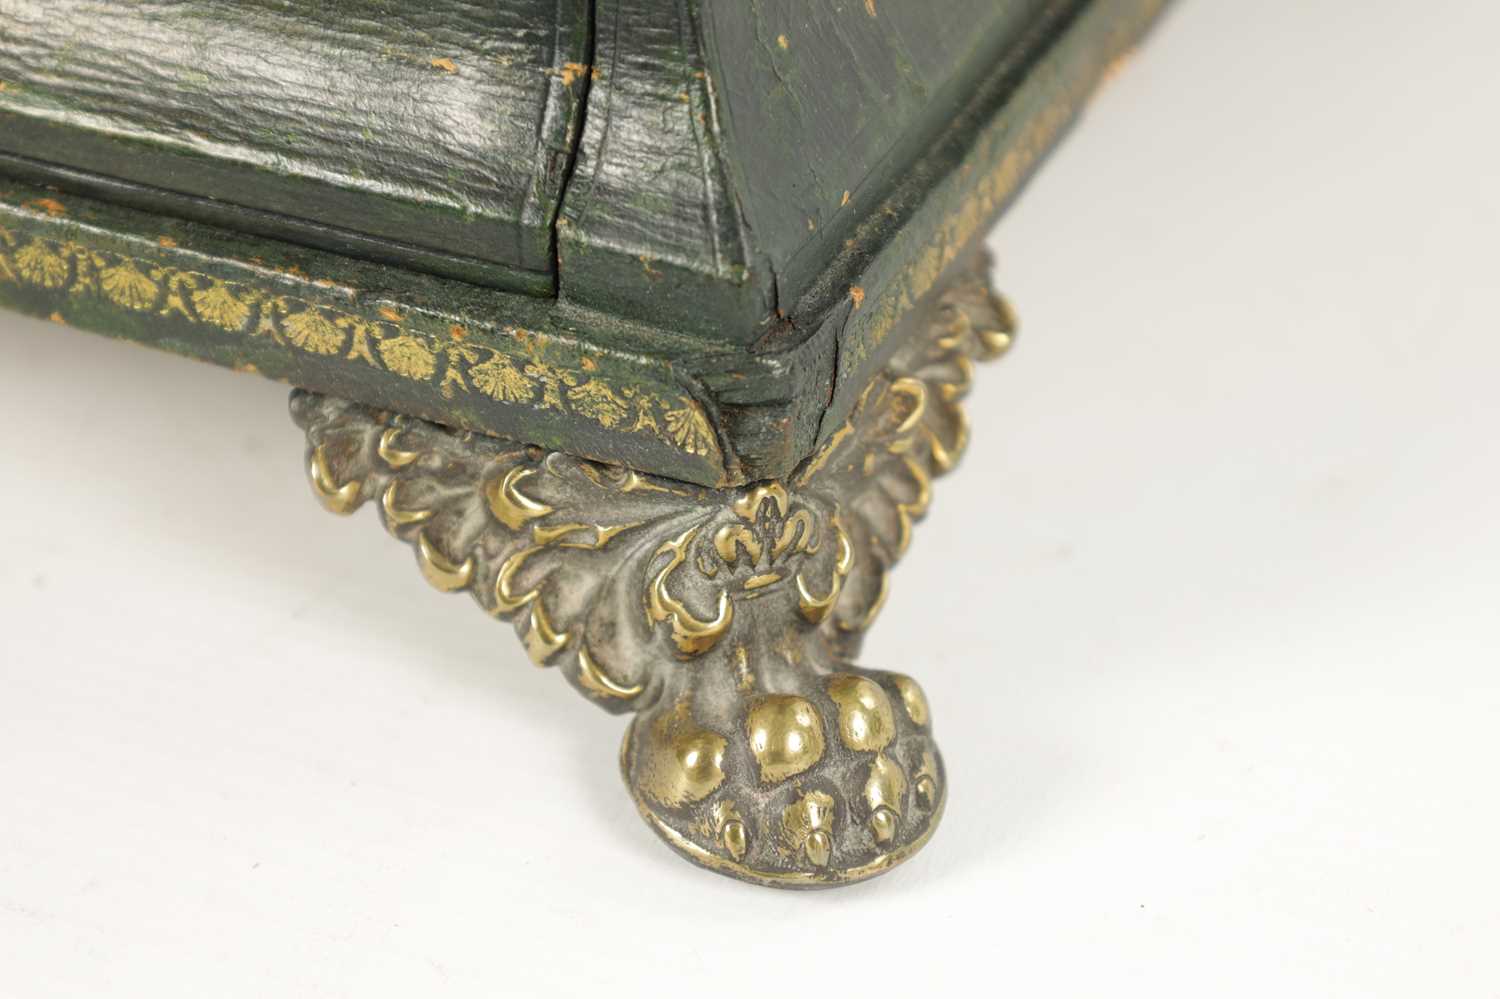 A FINE REGENCY TOOLED LEATHER LADIES COMBINED SEWING / WRITING BOX OF SARCOPHAGUS FORM - Image 8 of 11